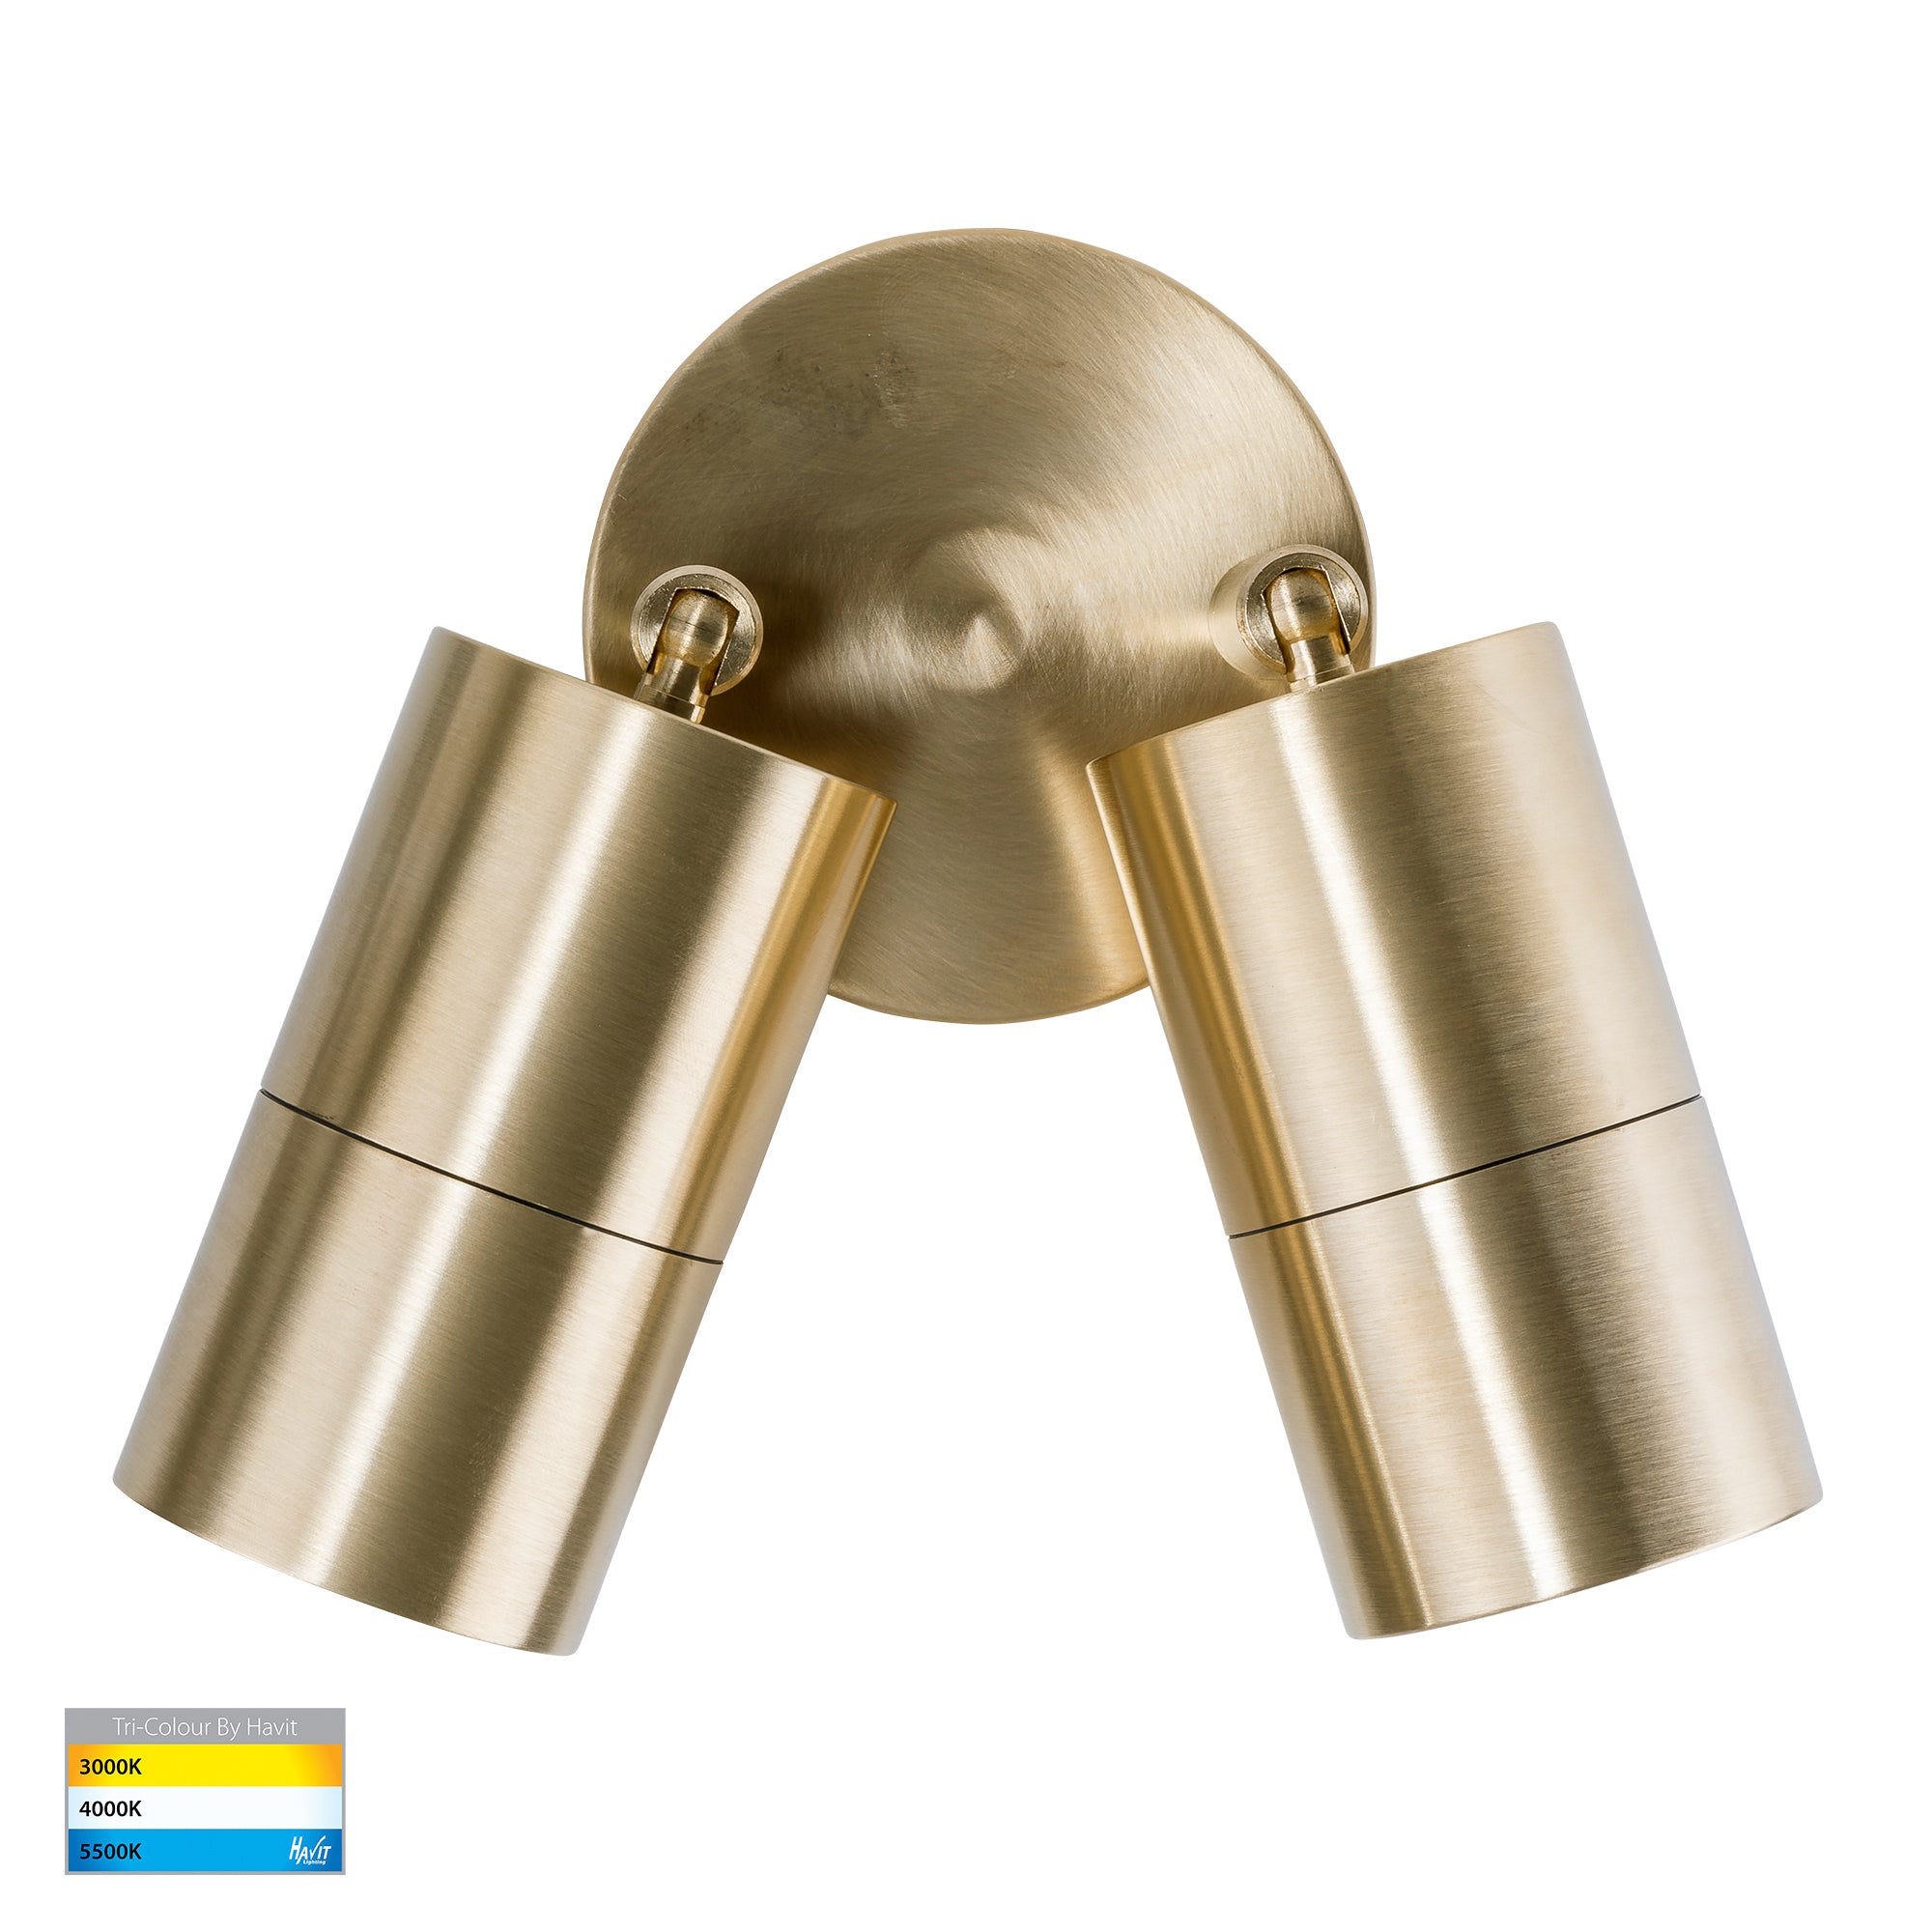 HV1355T-HV1357T - Tivah Solid Brass TRI Colour Double Adjustable Wall Pillar Lights